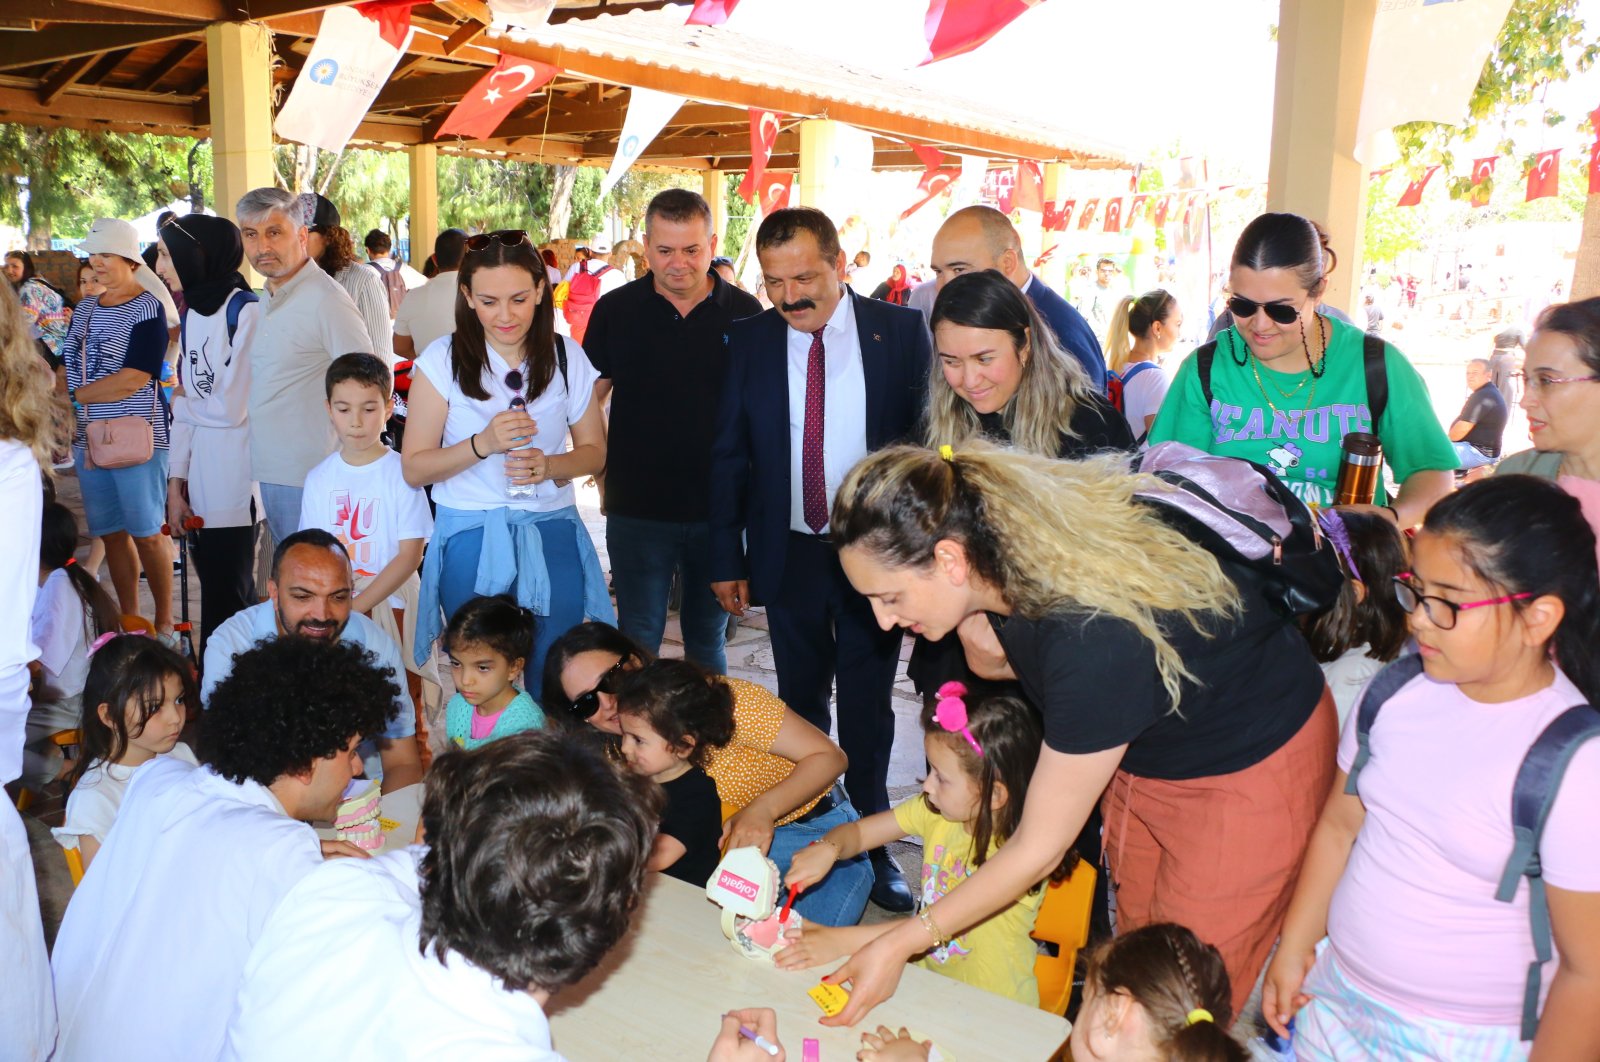 Türkiye marks historic Children’s Day with nationwide events | Daily Sabah - Daily Sabah